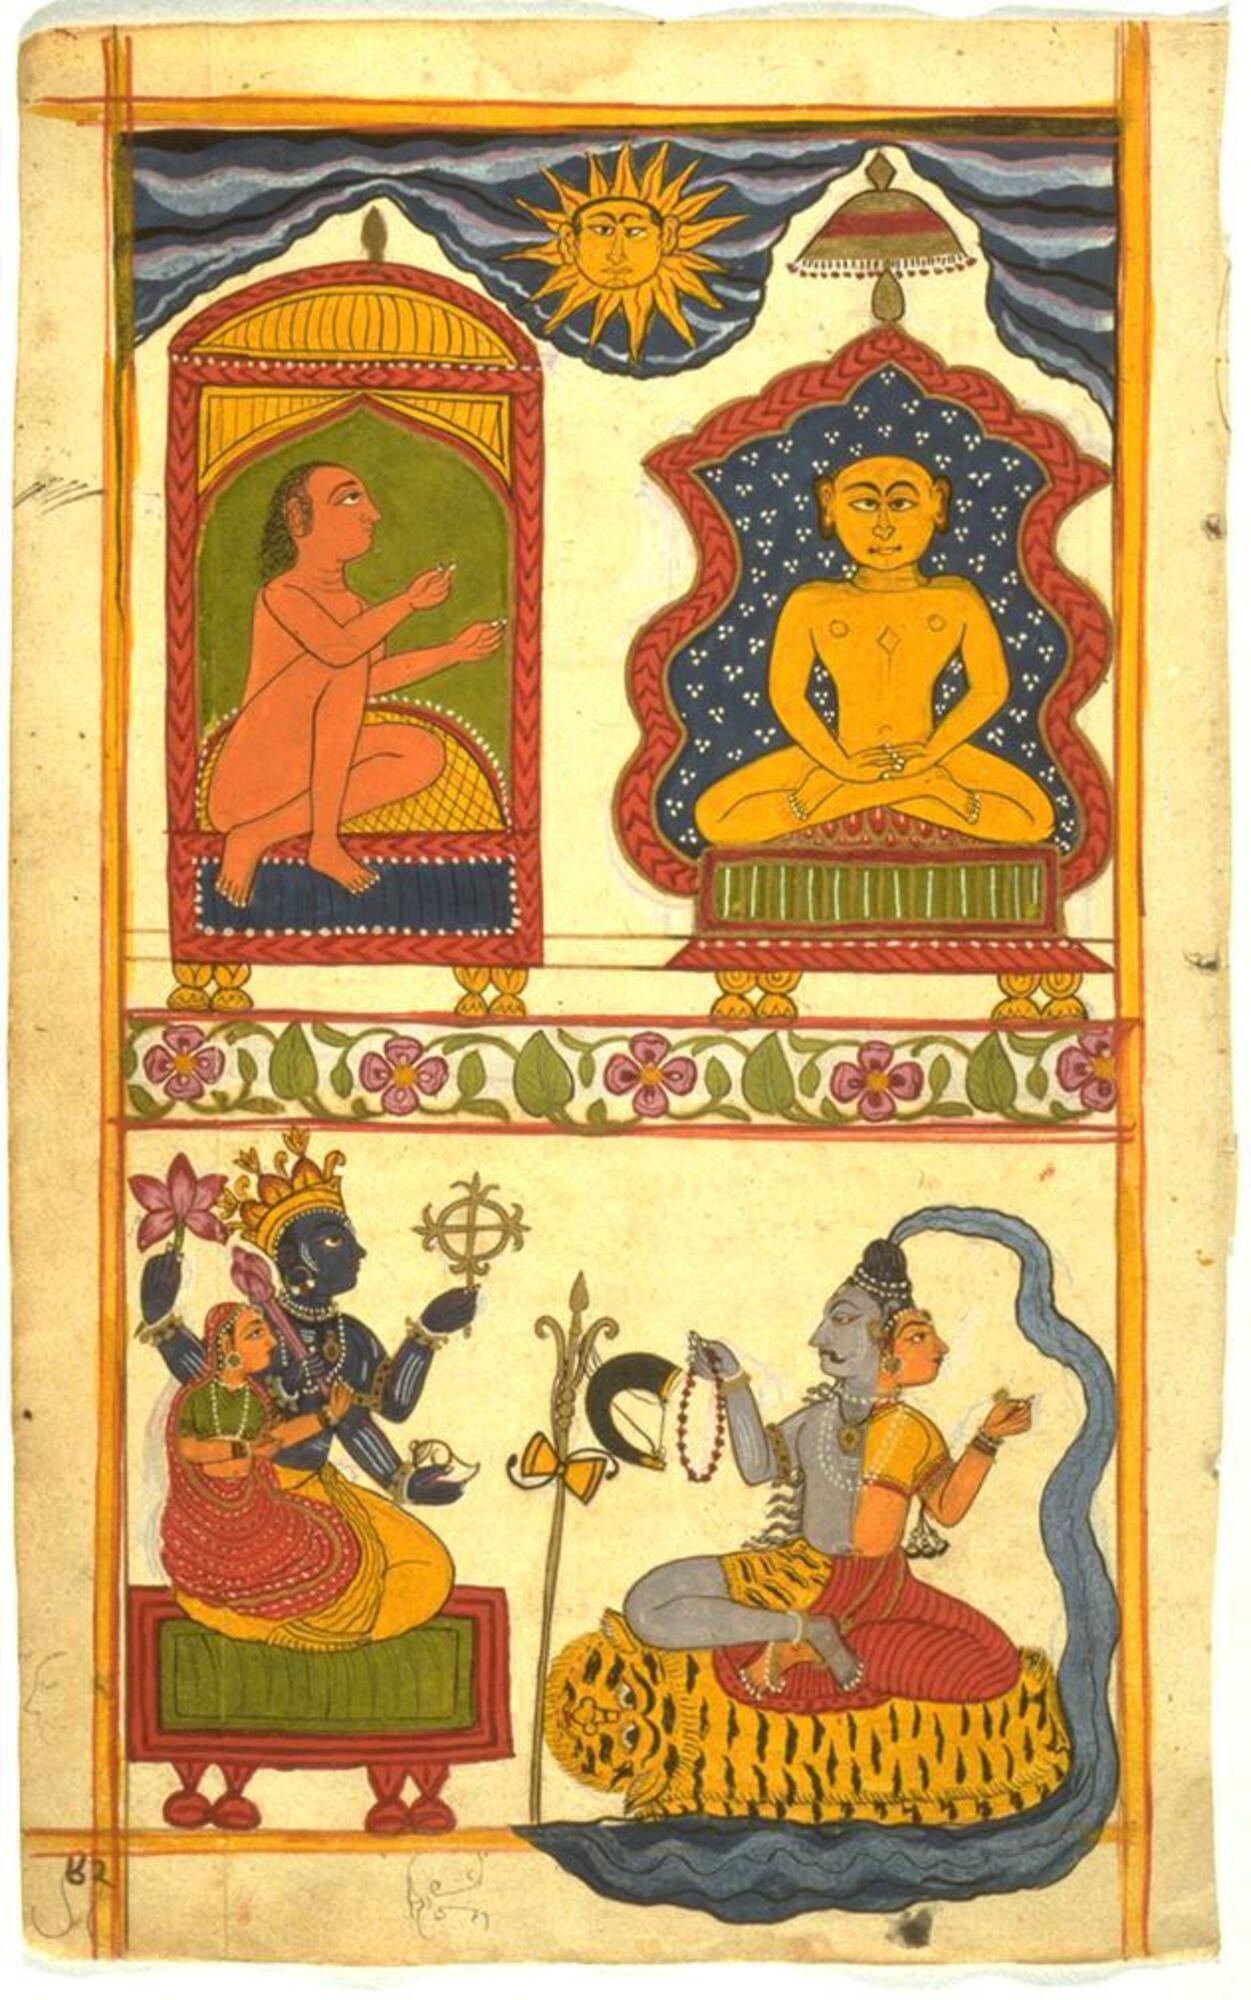 This work is painted in tones of red, green, dark blue, and orange/gold, against a light background. At the top is a sun with a many rays and a human face. Below this are two seated figures who are unclothed. They are seated on thrones decorated with colorful designs. One has reddish skin and is shown in profile, looking at the sun with hands raised. The other has orange skin and is seated in a lotus posiiton, facing front. Below them is a scene that shows two figures, a woman and a blue-skinned man, turned toward a half-man, half-woman figure who is seated on a tiger rug. These figures are dressed in colorful clothing and adorned with jewelry and hold various objects in their hands.